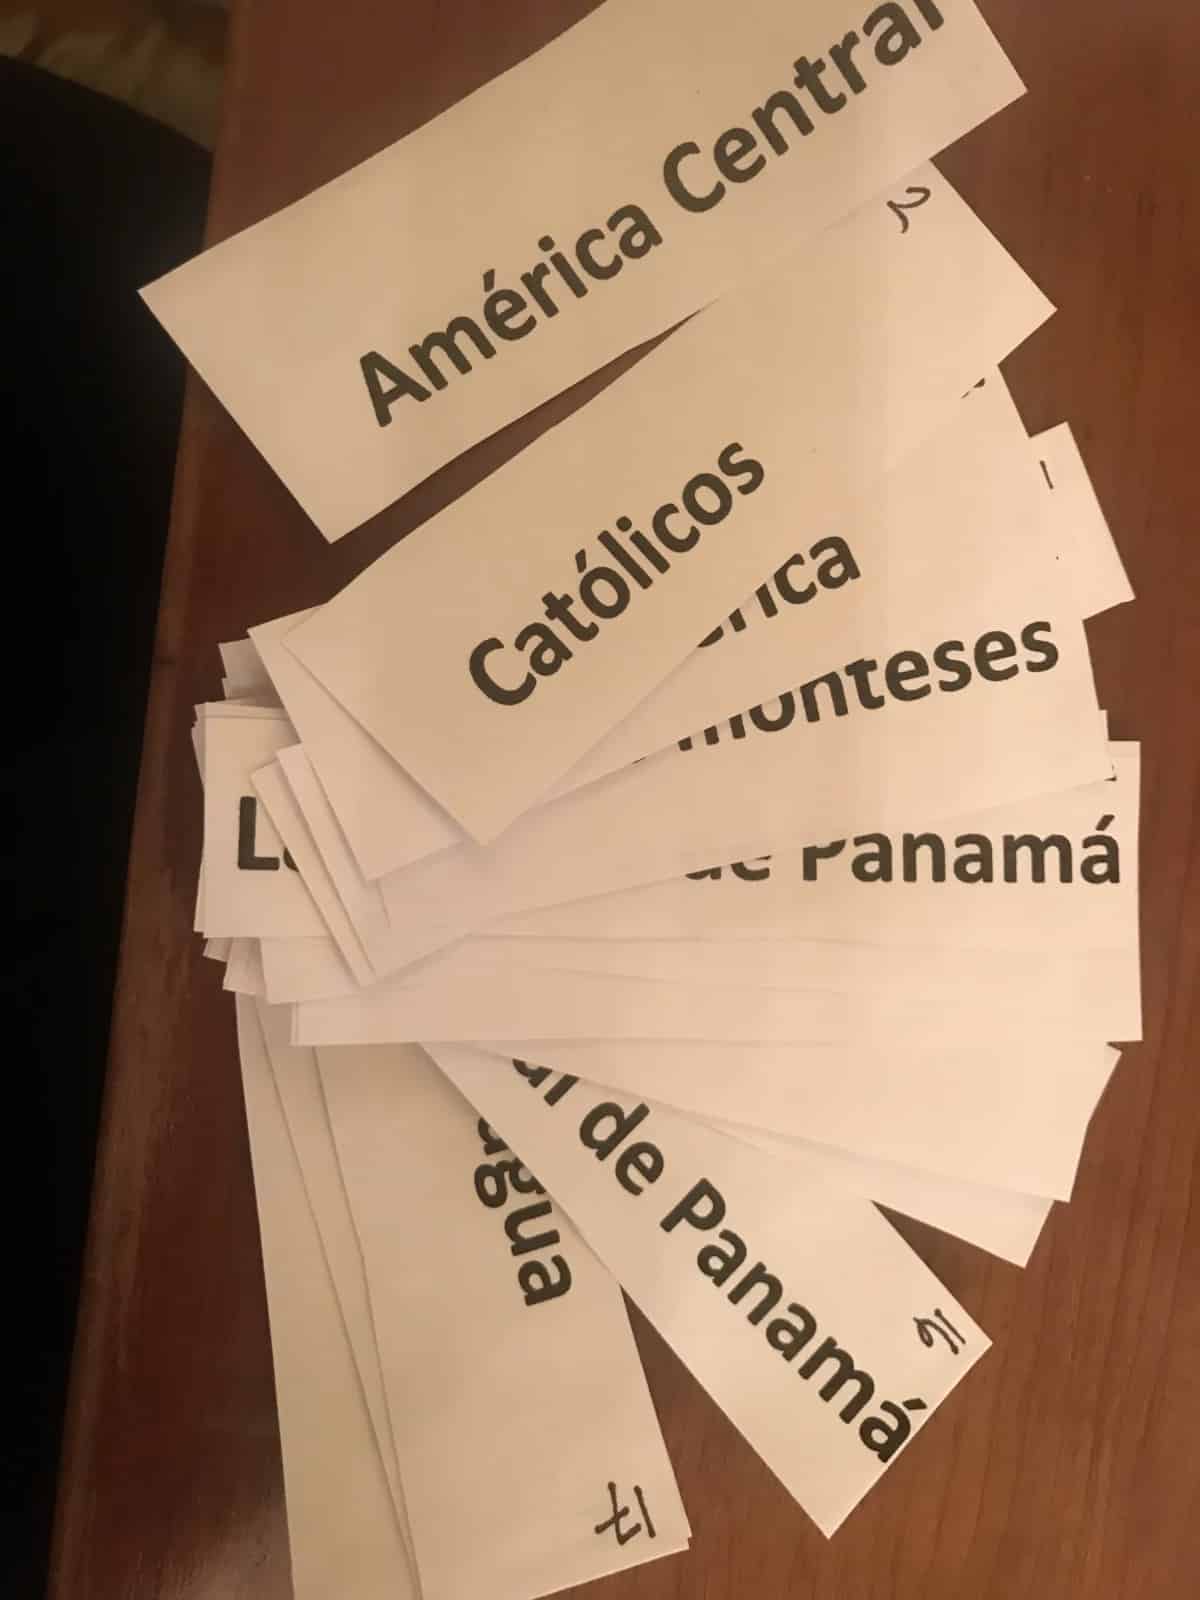 Photo of cut out pieces of paper containing words from Central America